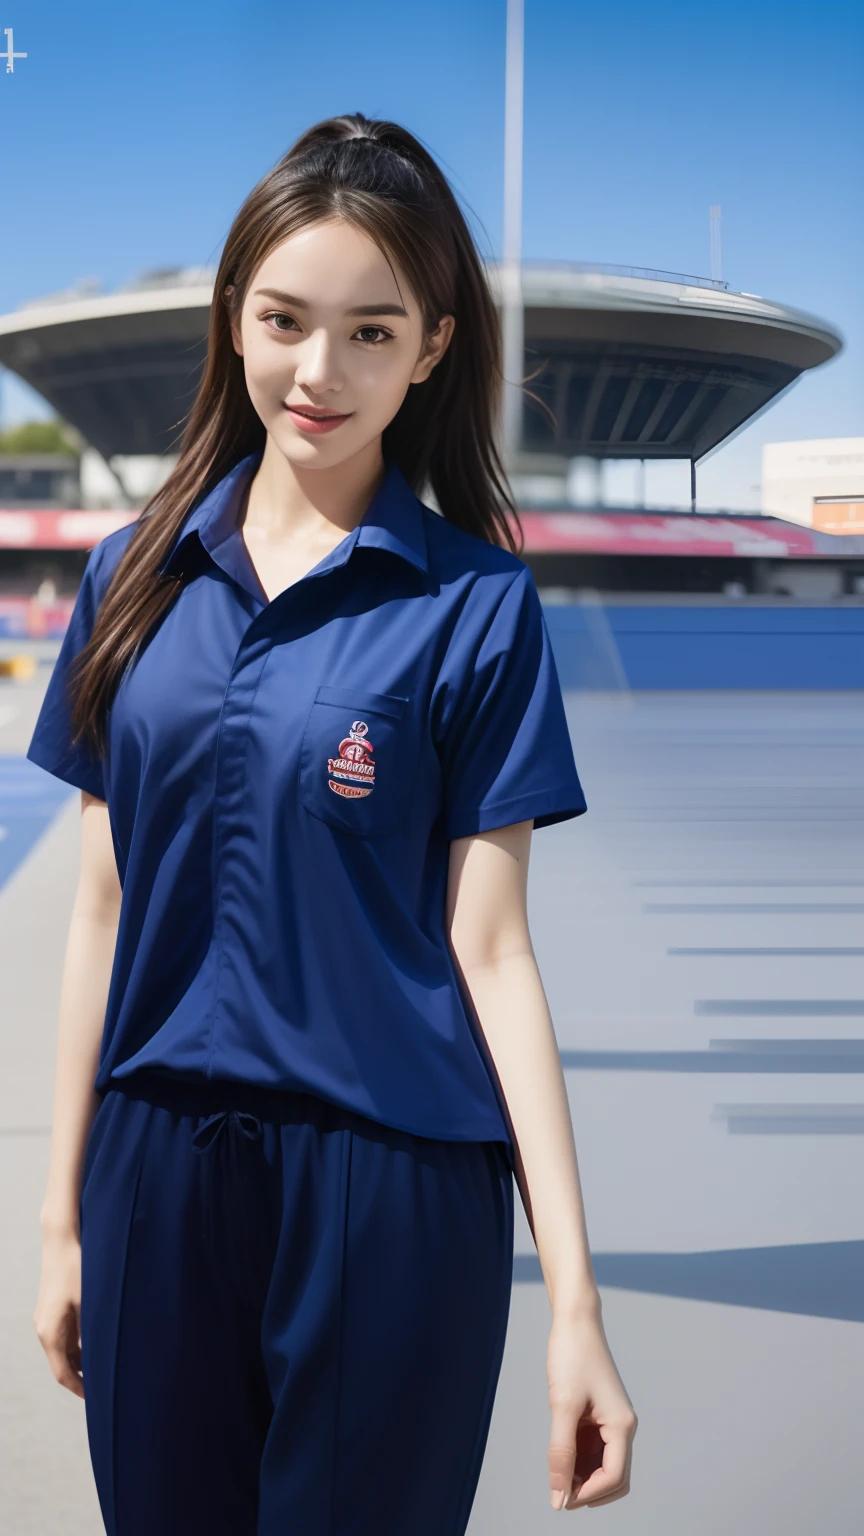 (bestquality,10,10,highres,masterpiece:1.2),ultra-detail,(Realistic,photorealistic portrait,photo-realistic:1.37),1 cute girl sitting on the football field,oily shiny skin,bara,light smile,BDclothes,((blue shirt:1.3)),short sleeves,shirt, trousers.,(navy_long_Pants Track:1.1), ((Stadium Background:1.3)),dynamic angle,excited,face focus,Dynamic Poses,from behide,Ass Focus,masterpiece, bestquality, ultra realistic, hyper-detail, 8k resolution, RAW photo, crisp focus, ((Navy blue shirt:1.1)), short sleeves, Long Path, Perfect body, 2 mature women, 18yo, cinematic light,Blue sweatpants,Gymware,Correct anatomy,Complete body, Correct body, sharp face, Anatomically correct body, full entire body, Realistic gestures, long-haired, Realistic poses,Wear long shorts......................,Long leg span,Shapely,Sculpting Girl, Slender Figure, mannequin mannequins, Shapely, Beautiful body,Blue sweatpants